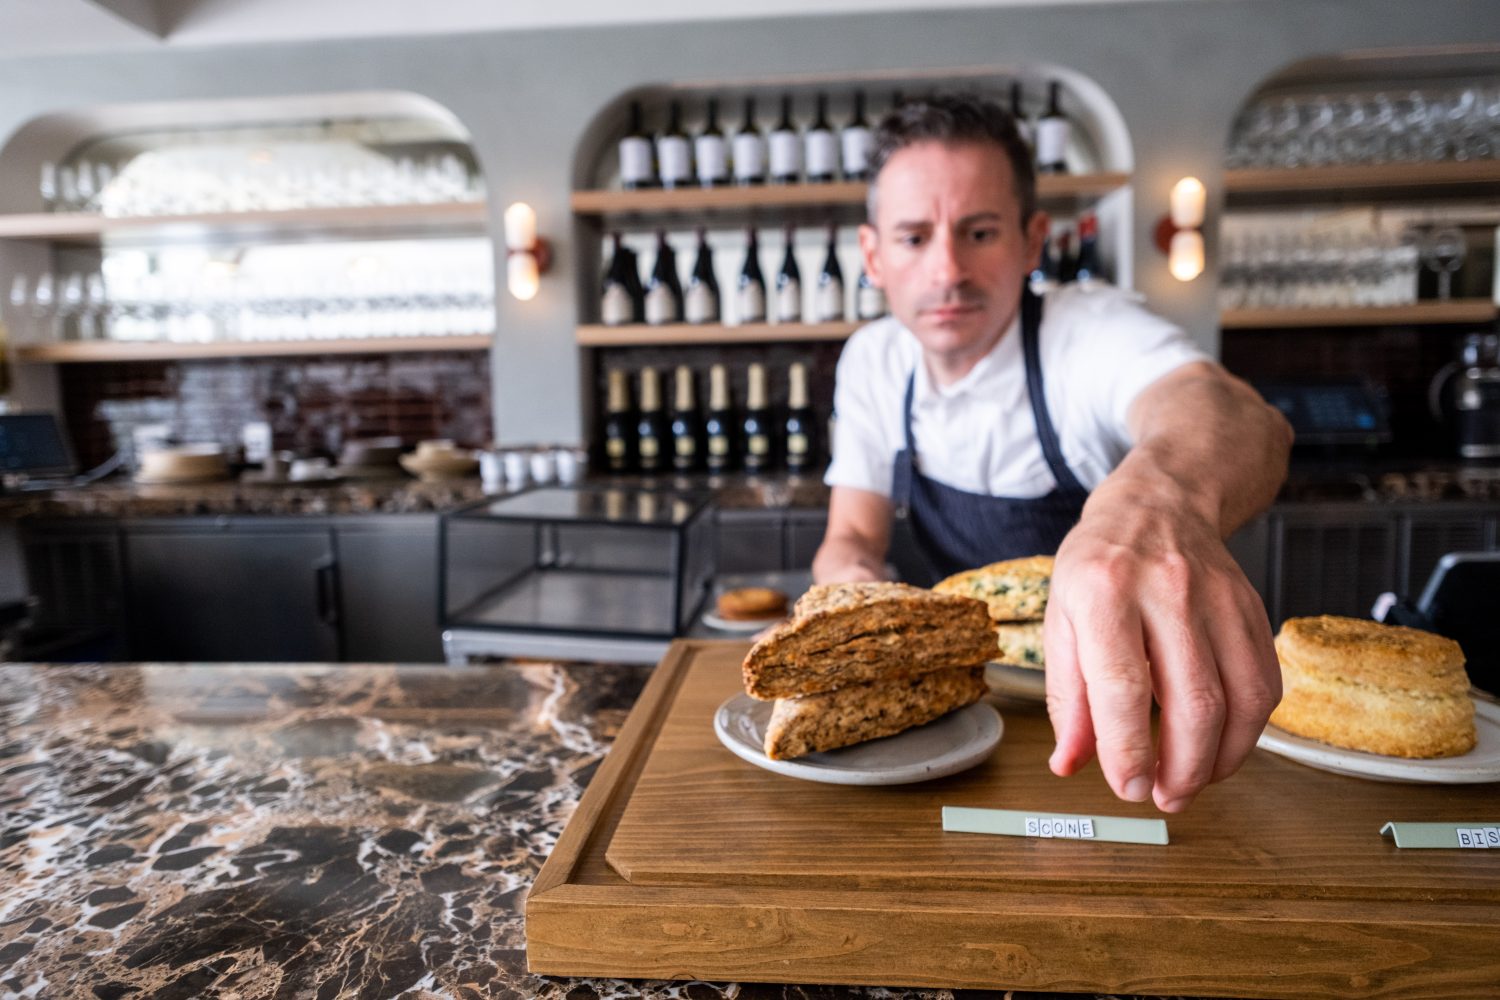 A chef hands a tray of food across the bar.